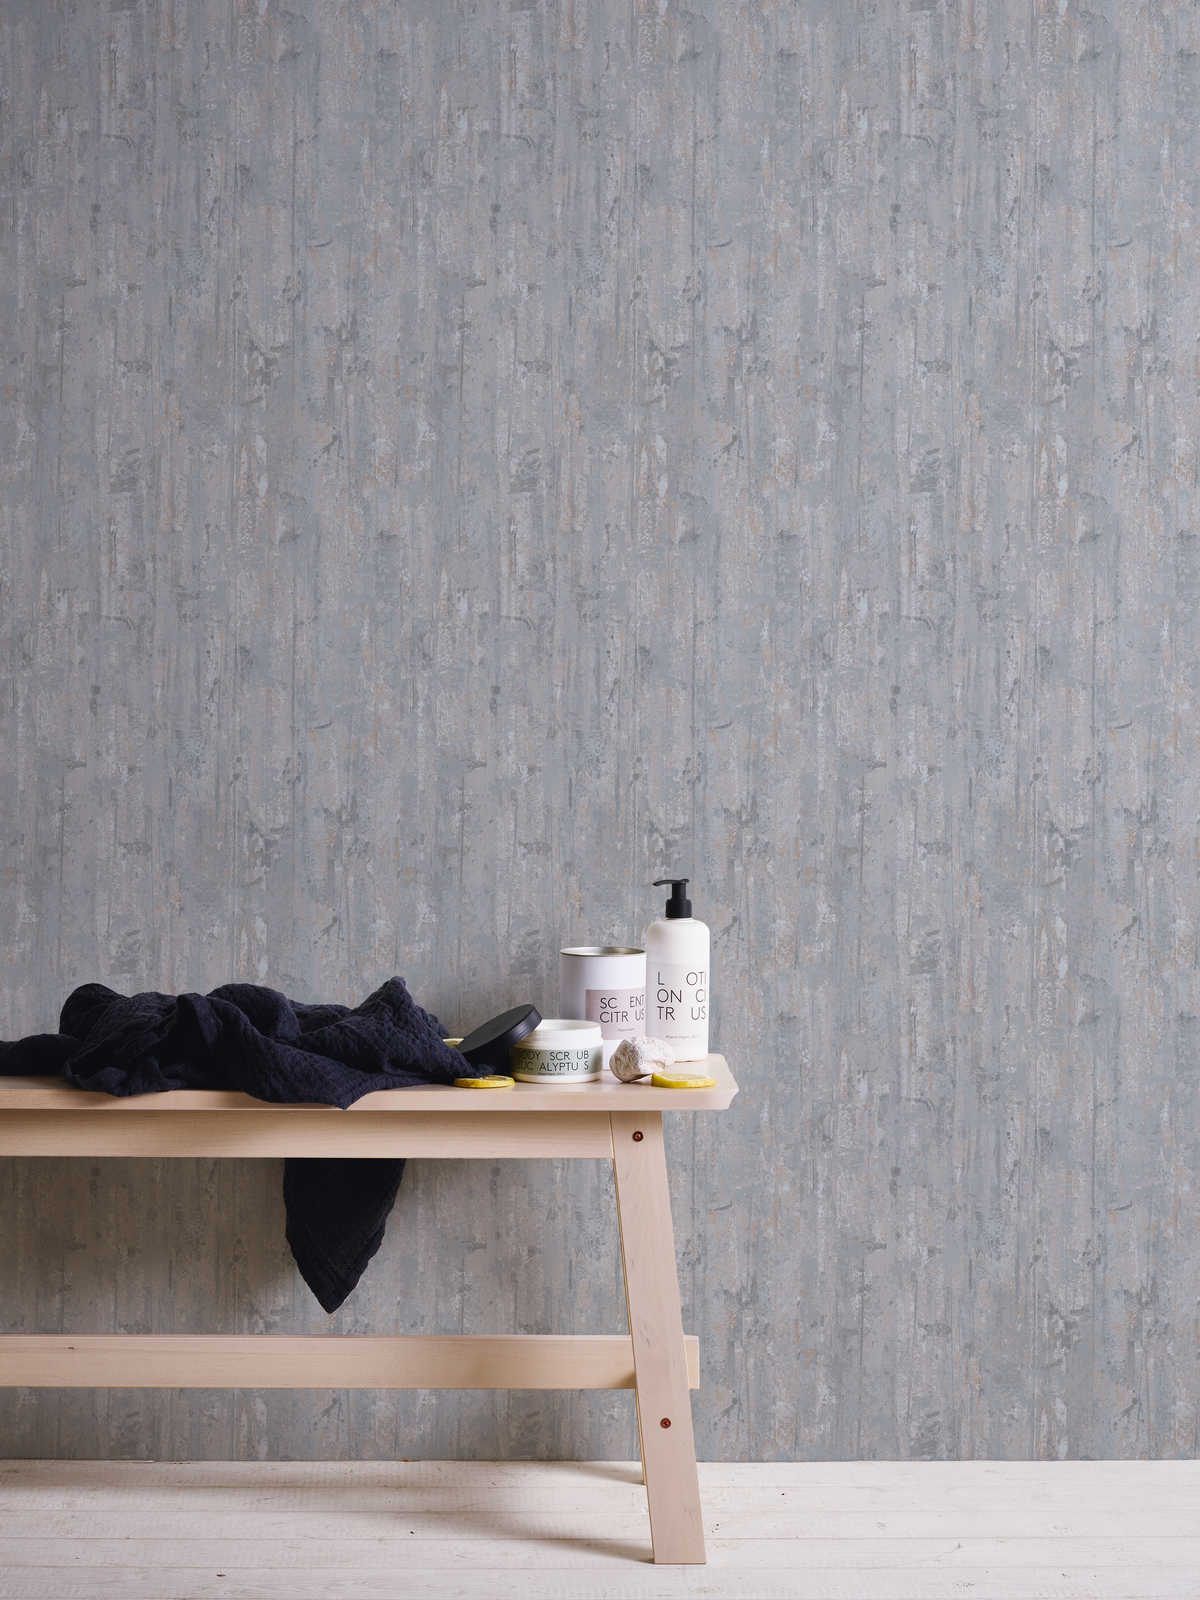             Ethno wallpaper with textured pattern in wood look - grey
        